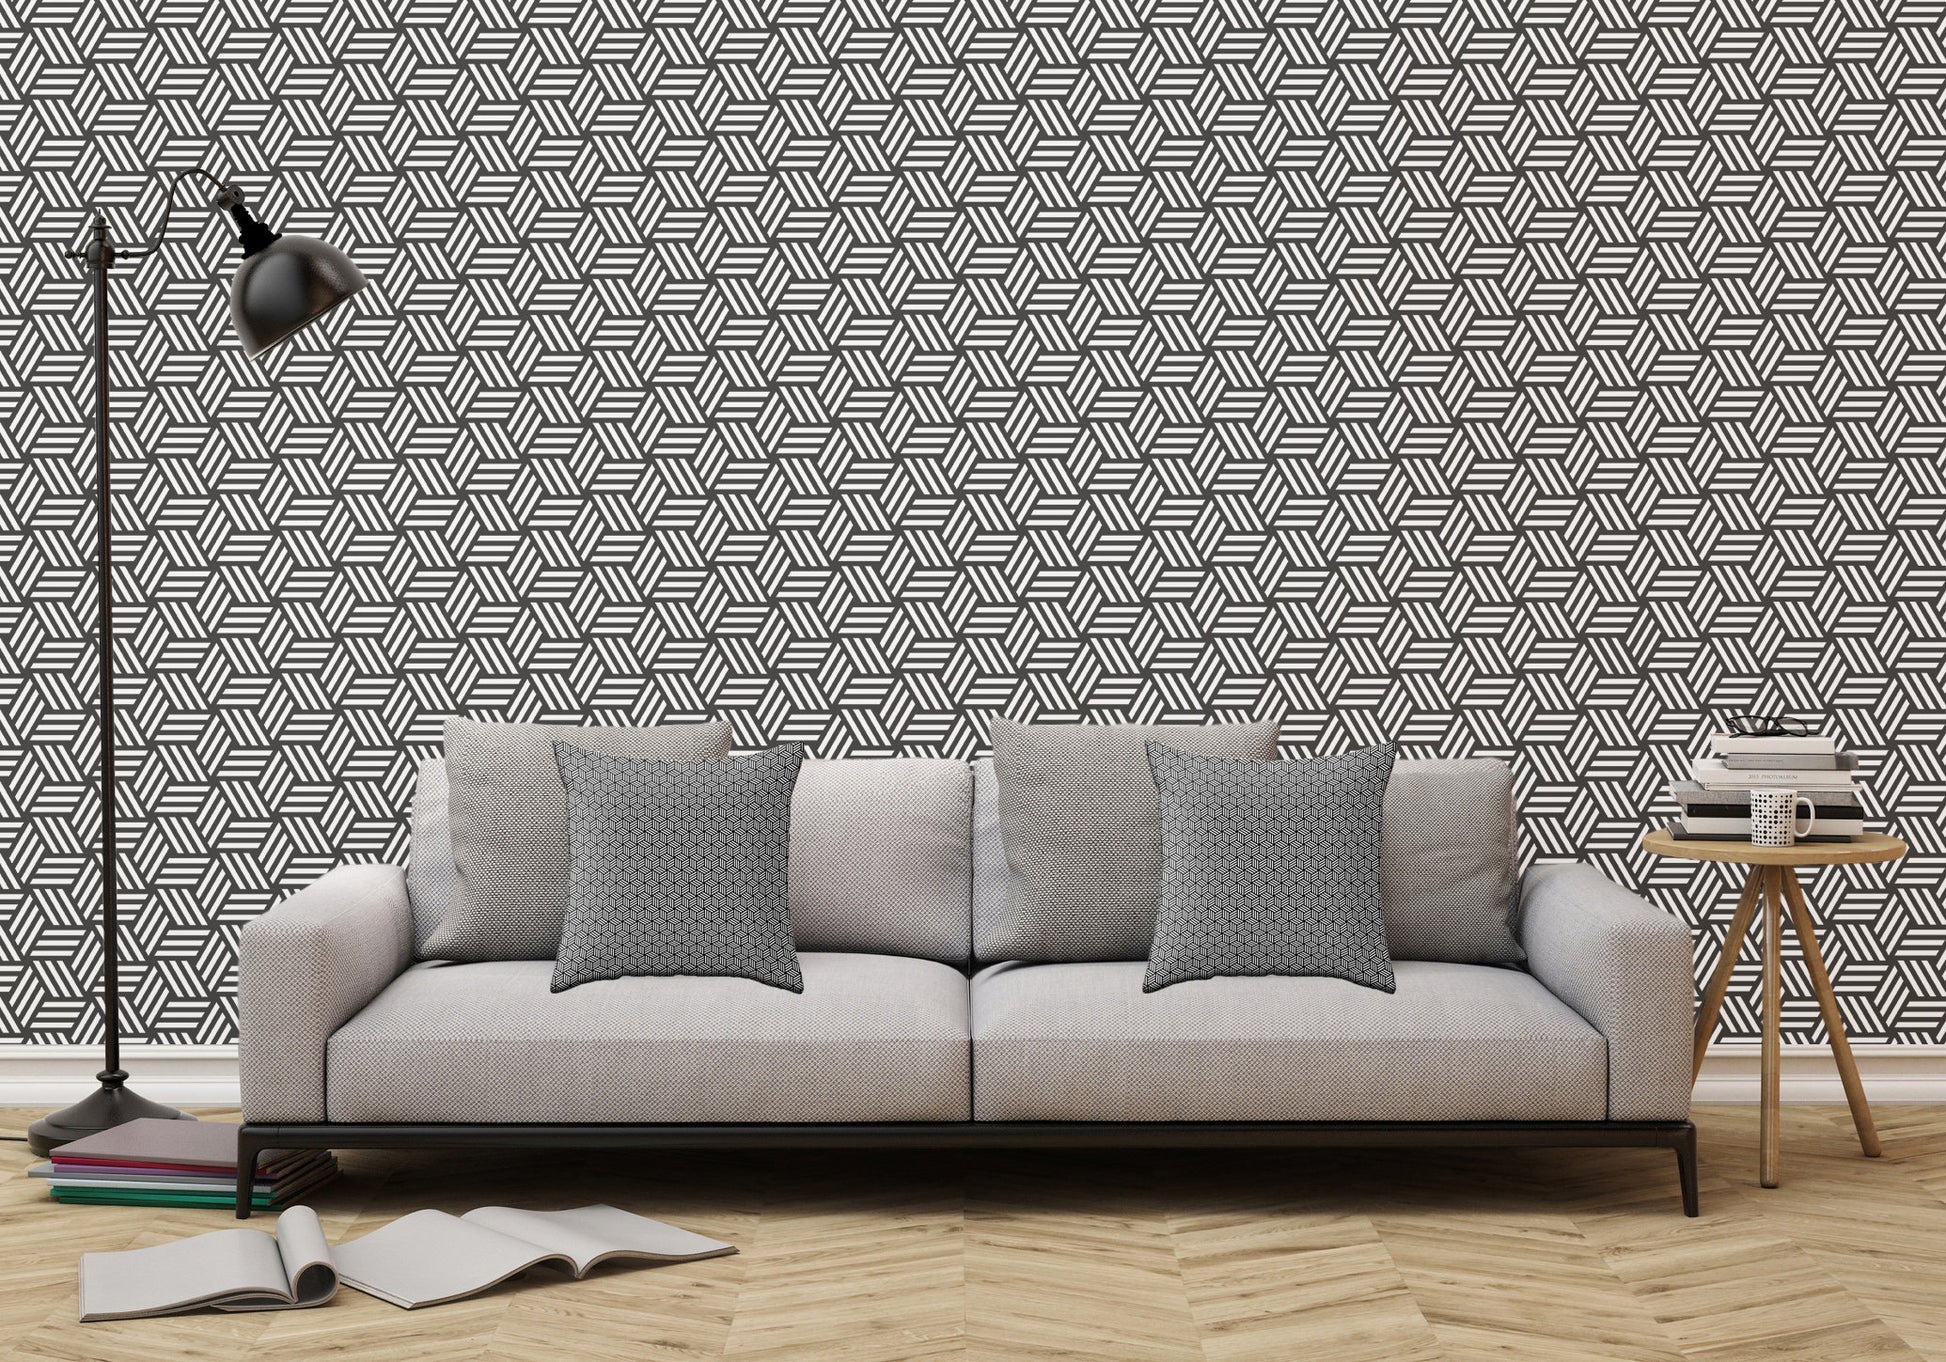 Isometric Weaved Cubes in Black and White - Adhesive Wallpaper - Removable Wallpaper - Wall Sticker - Full Size Wall Mural  - PIPAFINEART